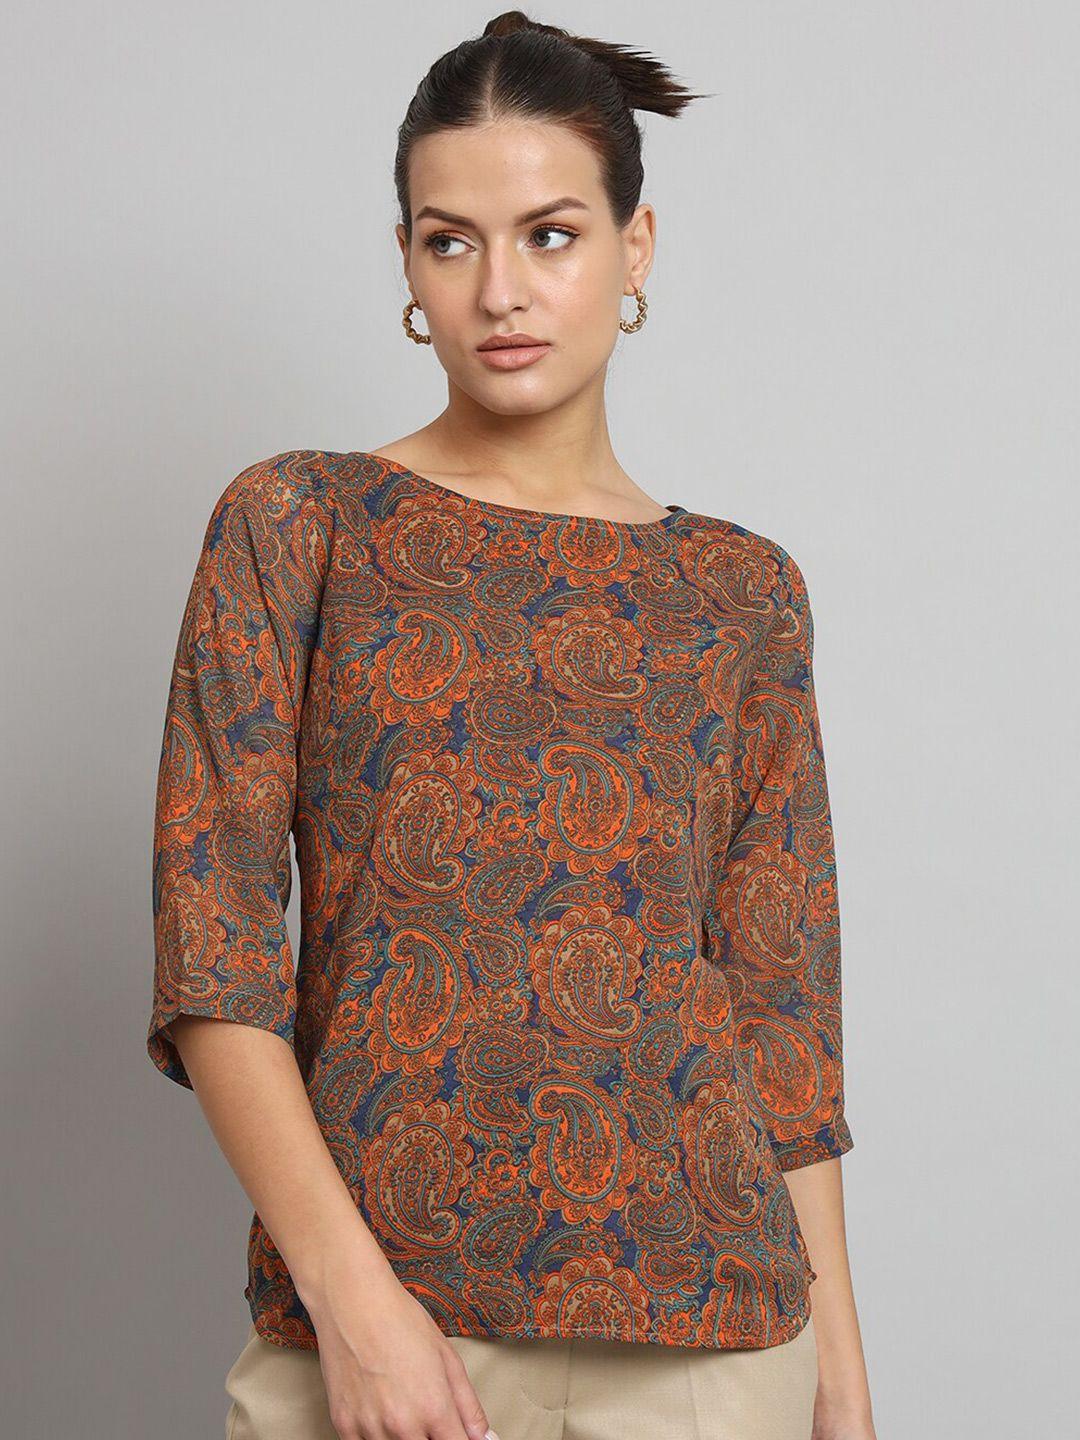 powersutra floral printed boat neck top